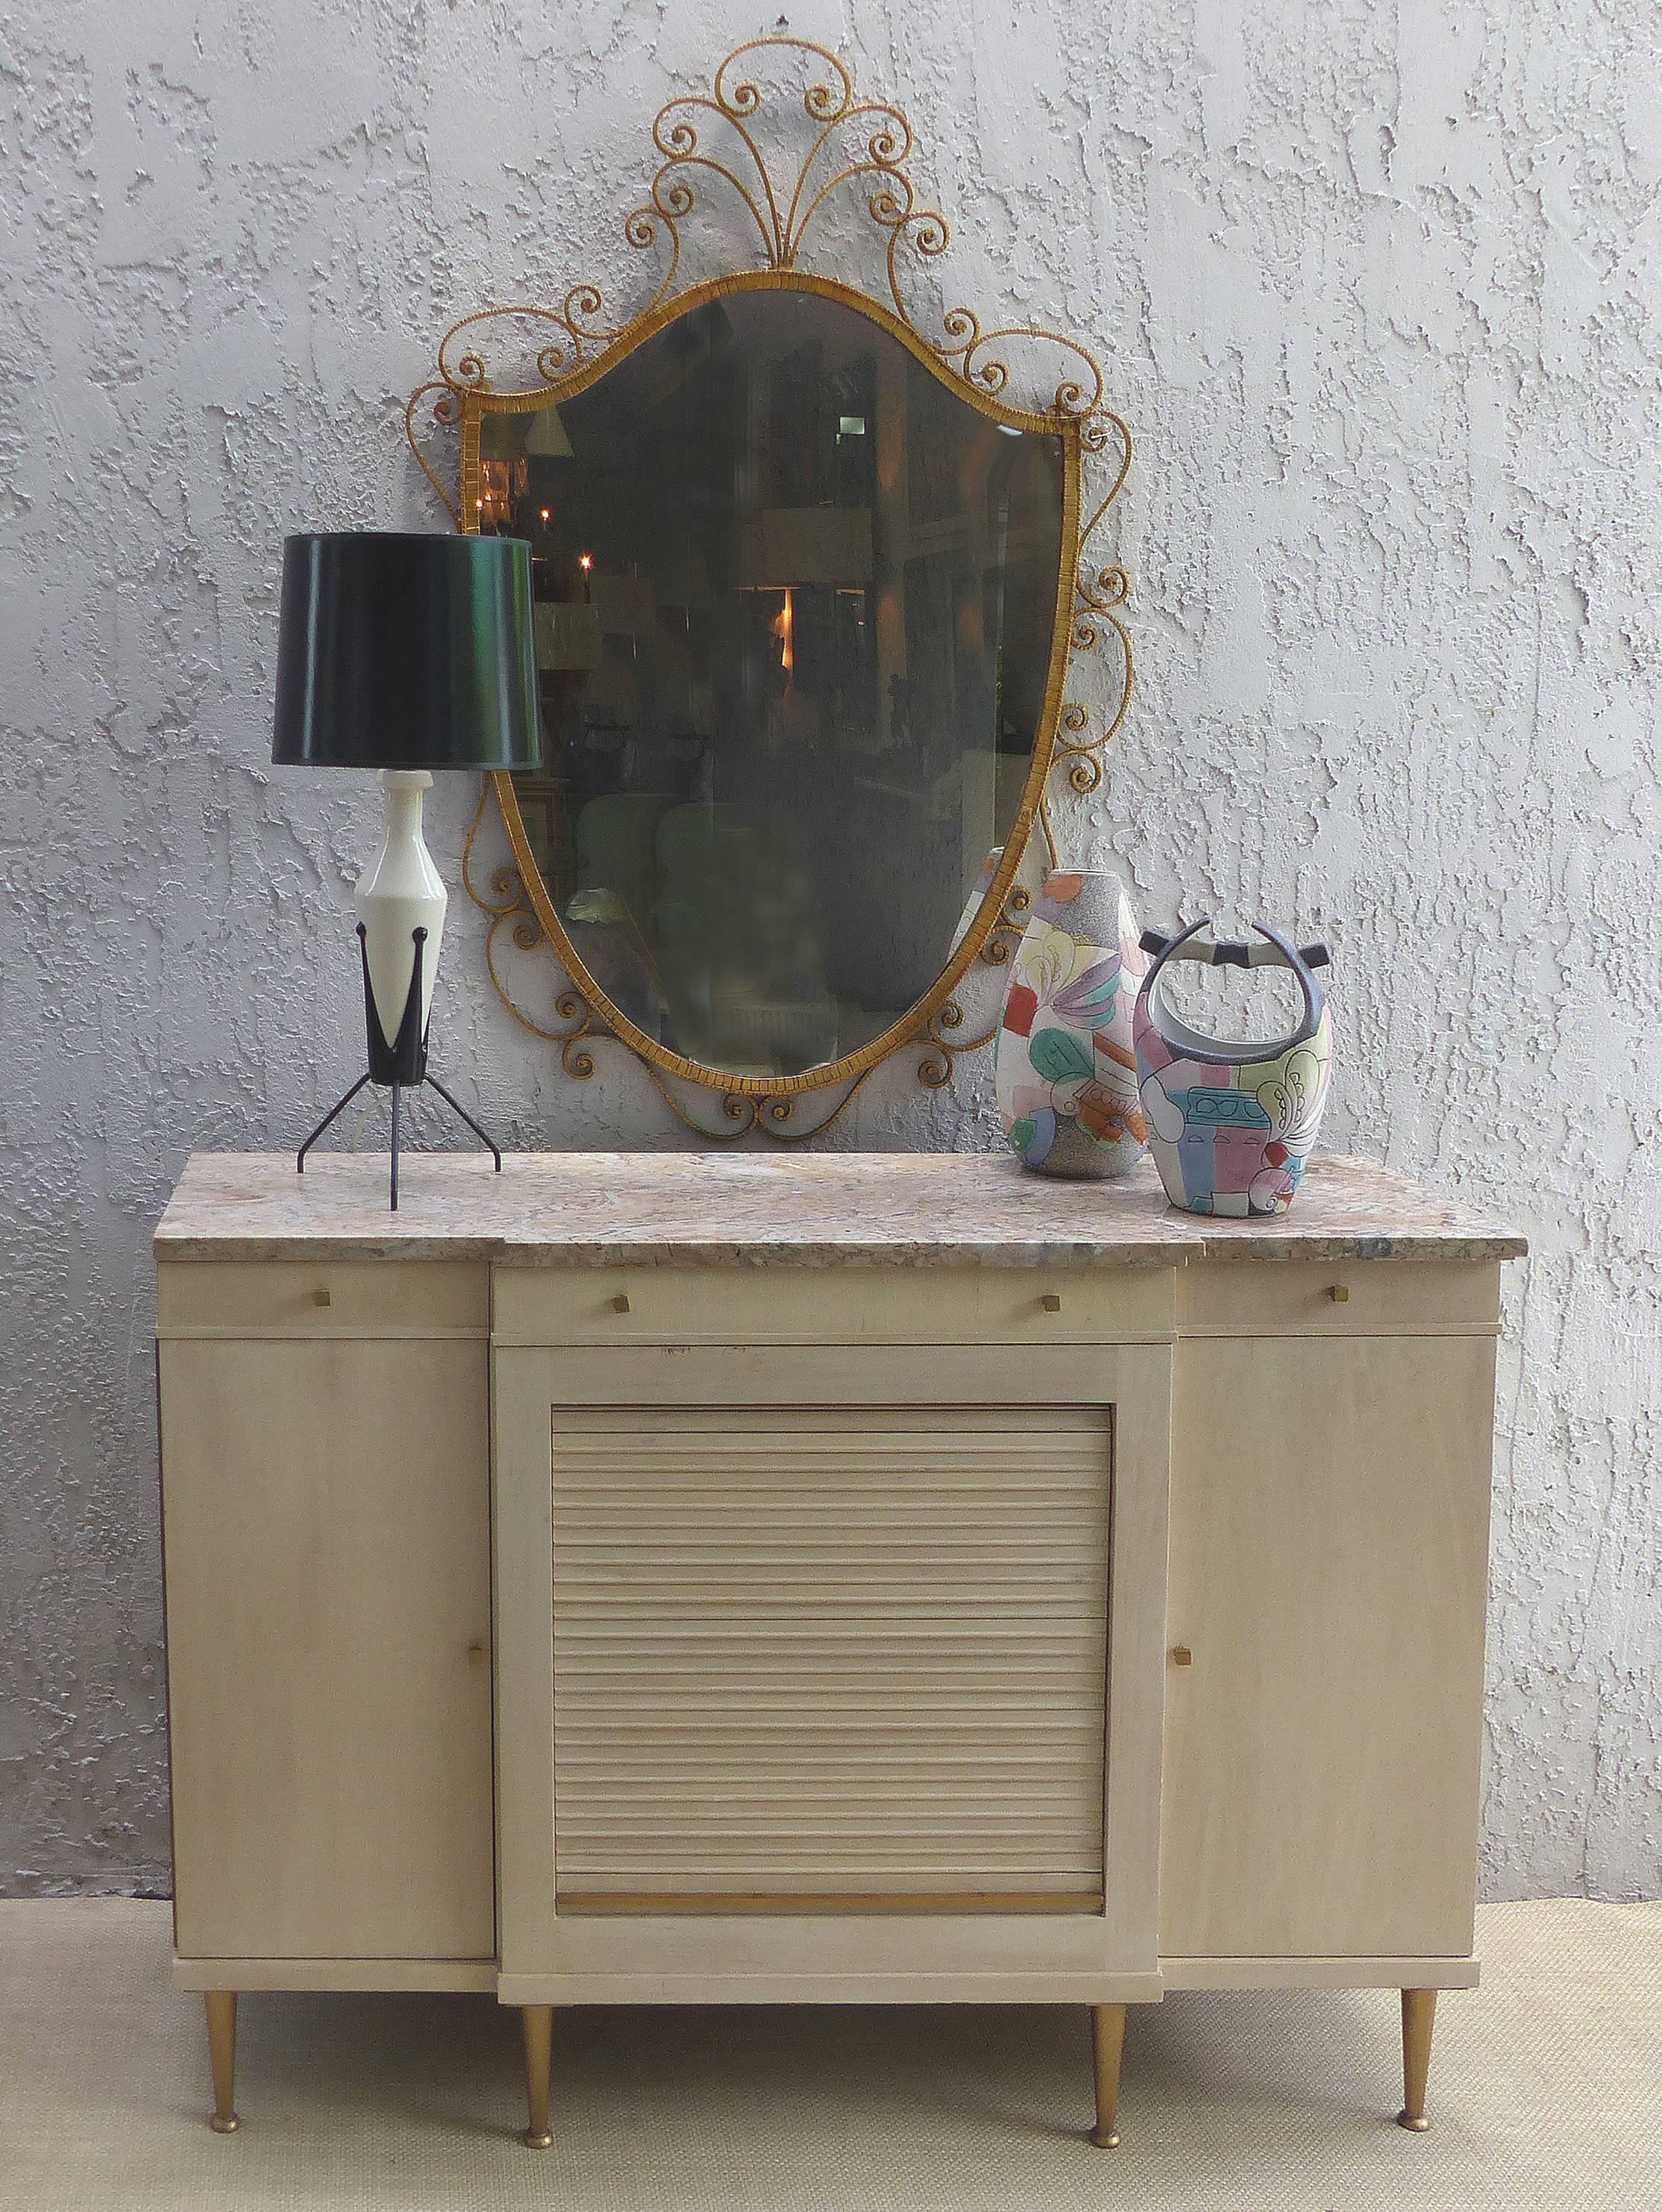 Offered for sale is an elegant 1940s Hollywood Regency marble topped credenza by John Widdicomb. The shallow cabinet has a colored marble top with brass hardware and legs; it is finished in a light washed cream color. The centre has a tambour door